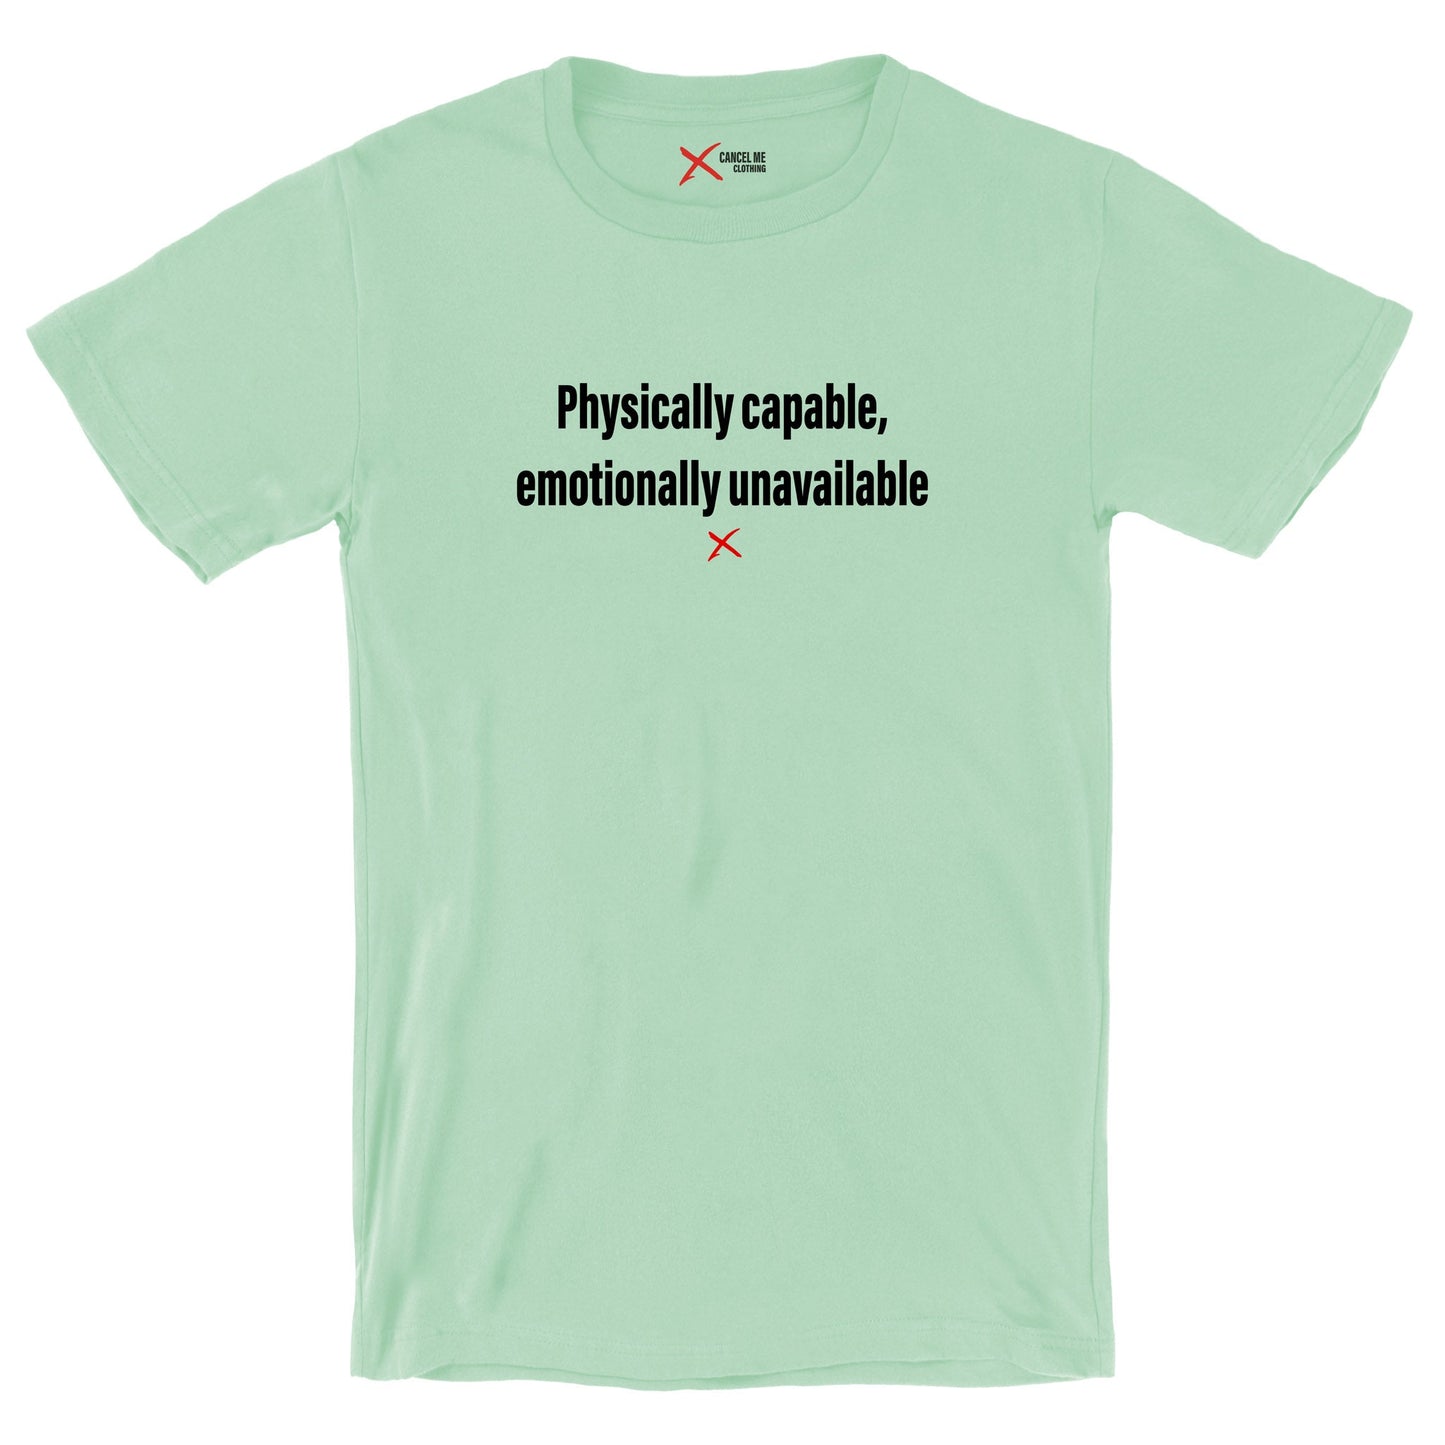 Physically capable, emotionally unavailable - Shirt